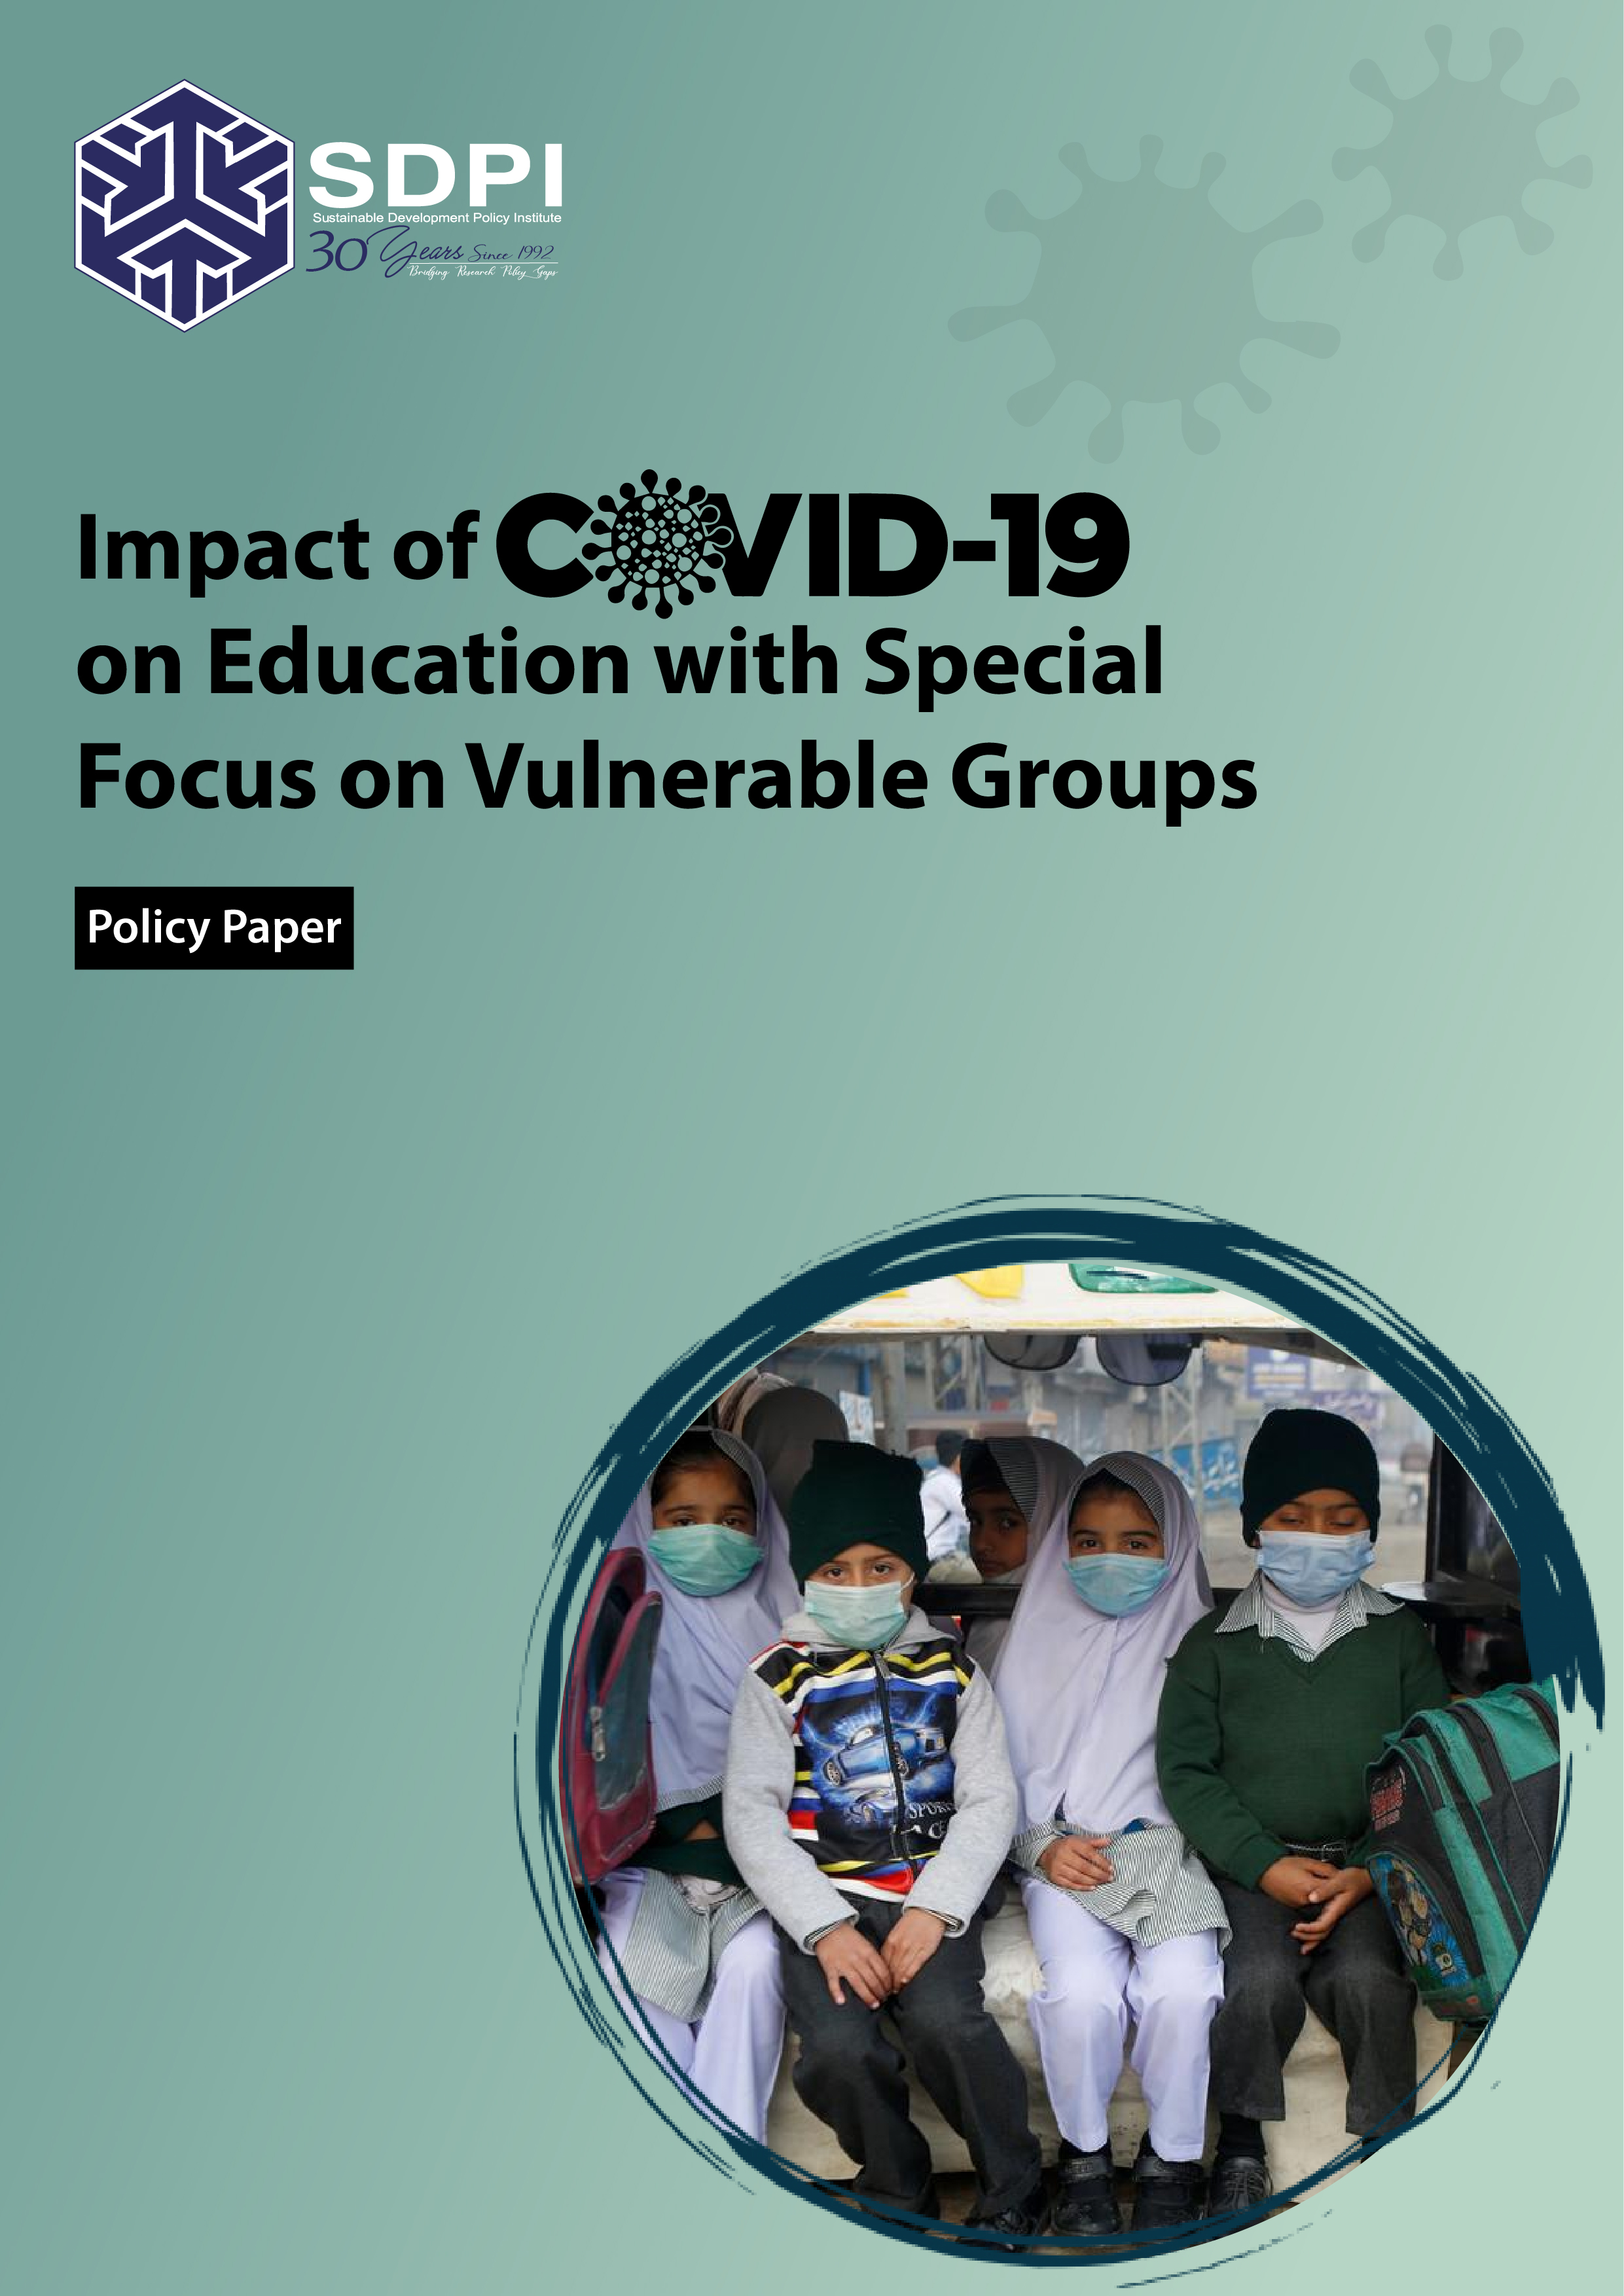 Impact of COVID-19 on Education with Special Focus on Vulnerable Groups